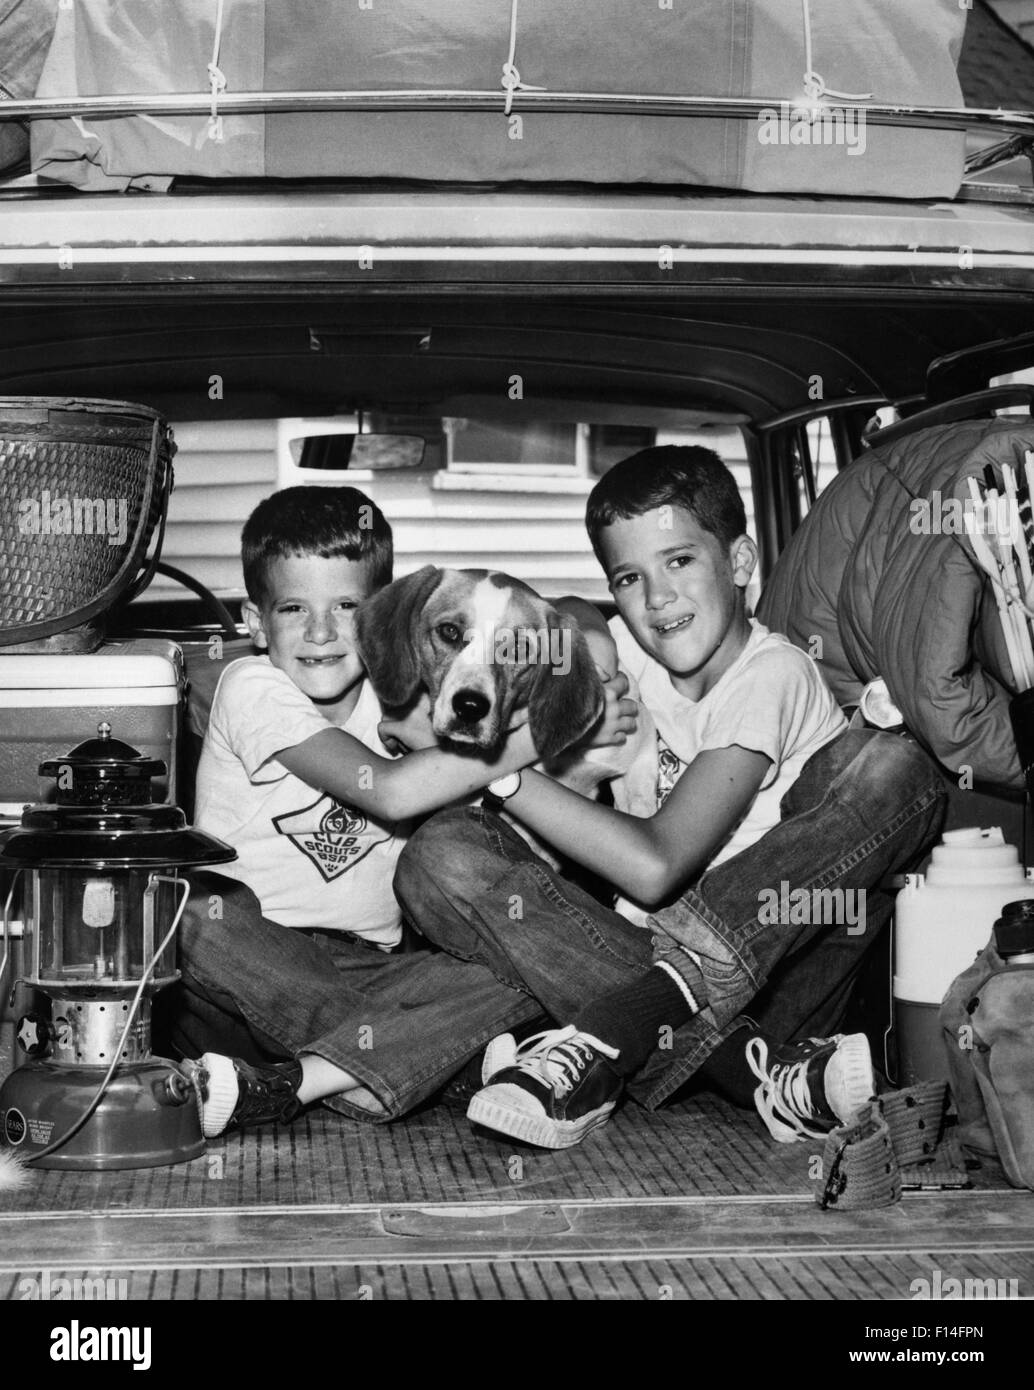 1960s TWO SMILING BOYS BROTHERS HUGGING PET DOG LOOKING AT CAMERA SITTING IN BACK OF PACKED STATION WAGON CAR READY FOR CAMPING Stock Photo